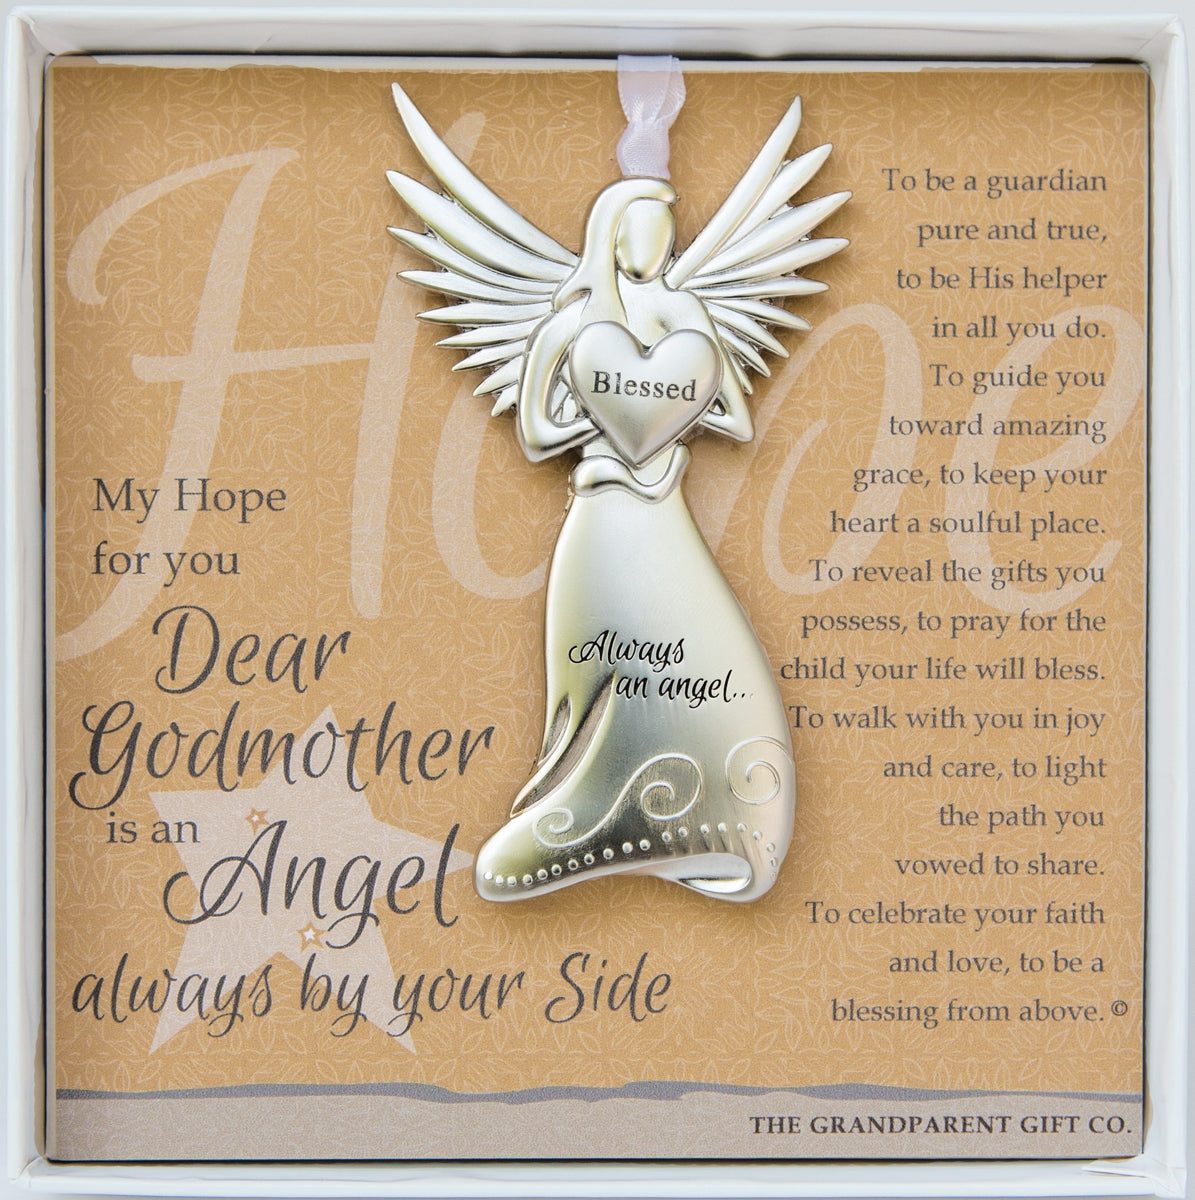 Godmother Gift - 4" metal blessed angel ornament with "Precious Godmother" poem in white box with clear lid.